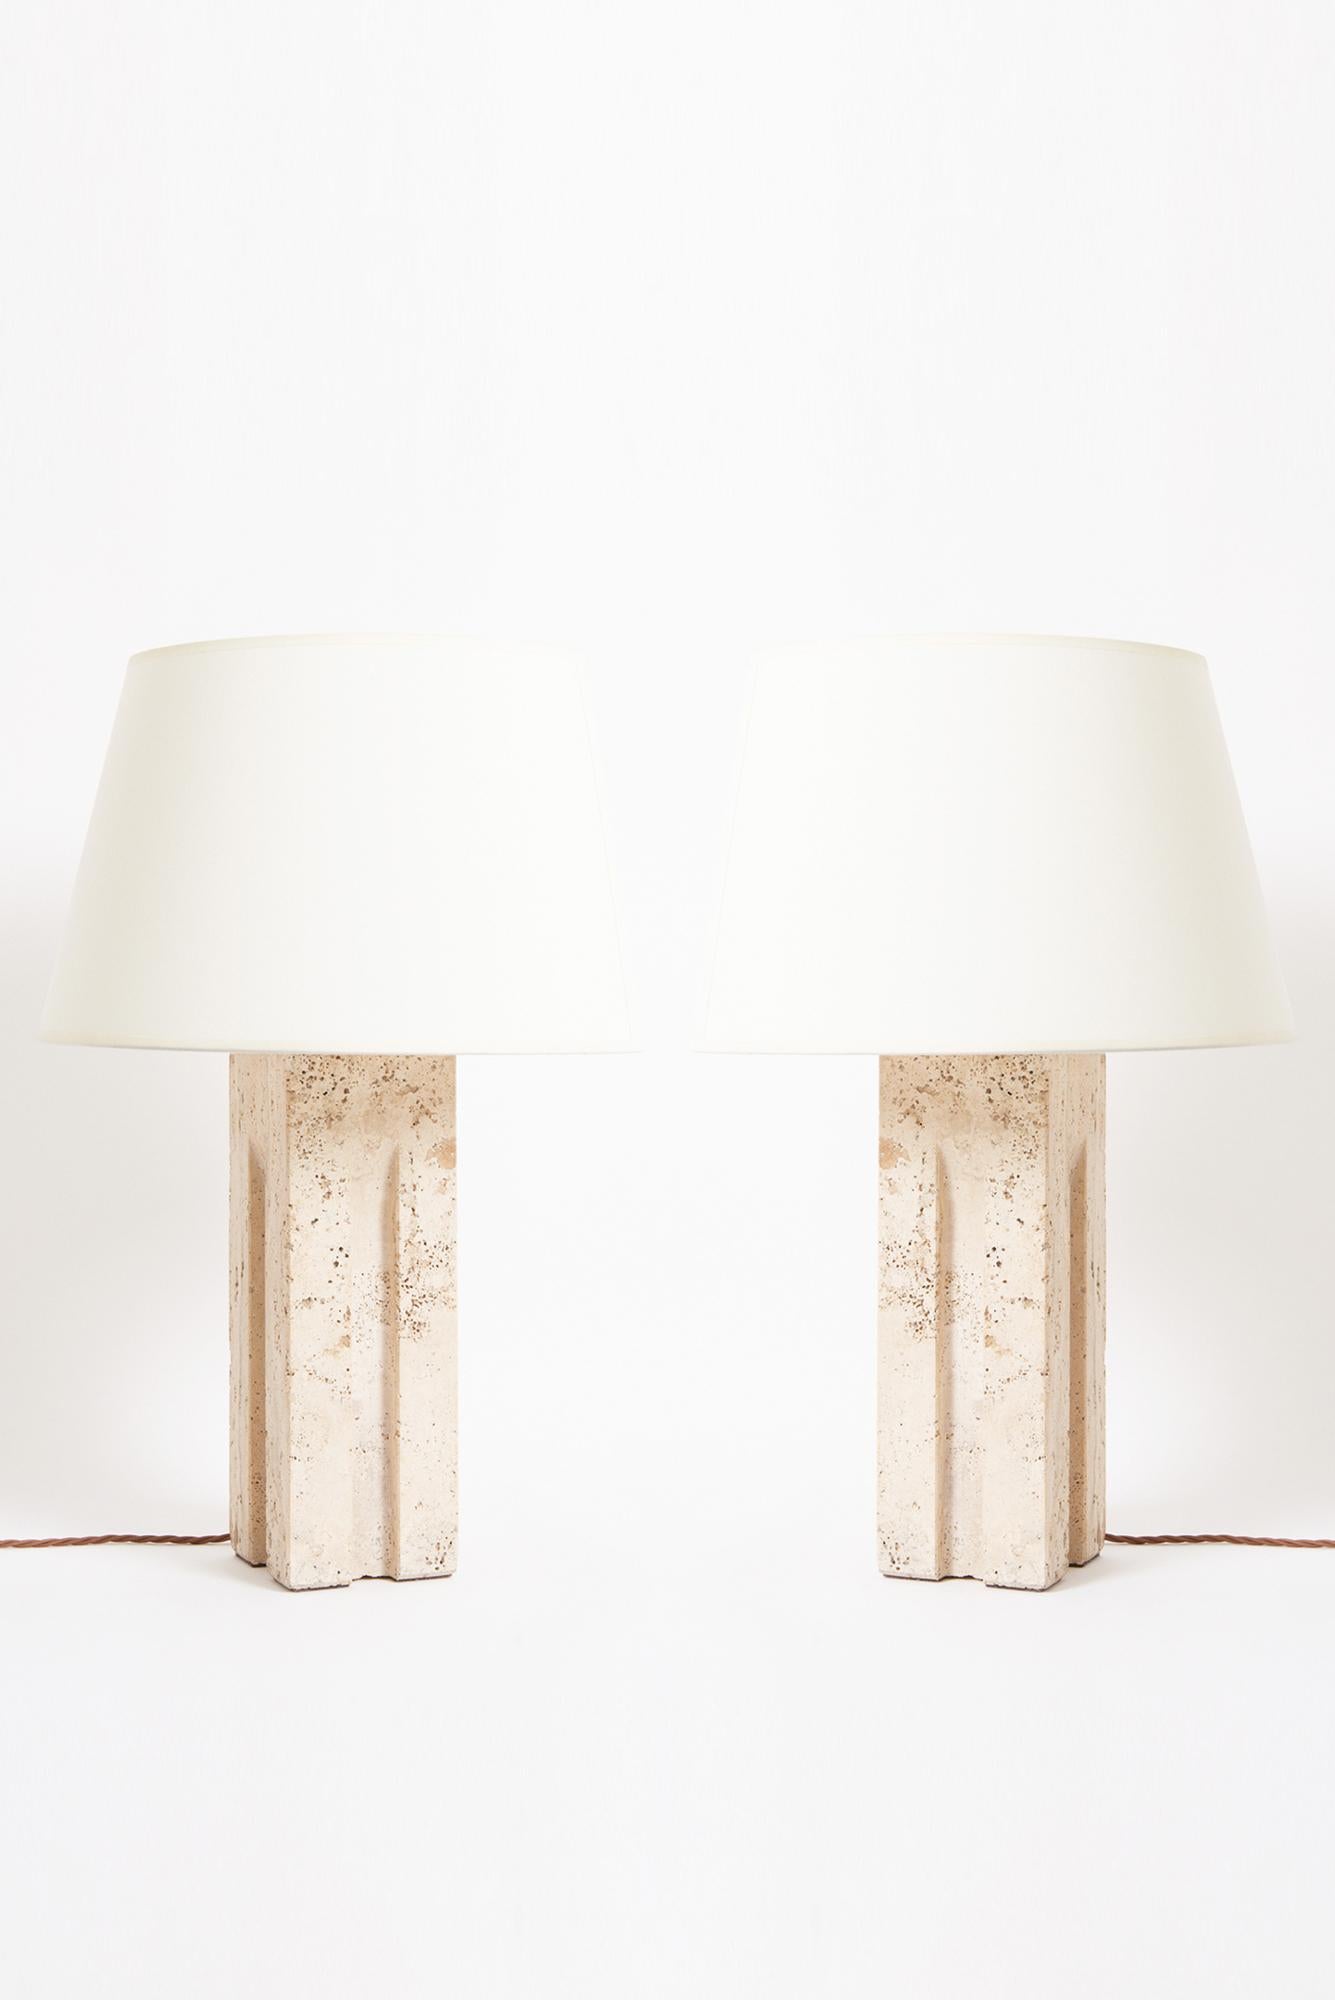 A pair of large carved travertine table lamps
Italy, 1970s
With the shade: 62 cm high by 41 cm diameter 
Lamp base only: 43.5 cm high by 12 cm wide by 12 cm depth